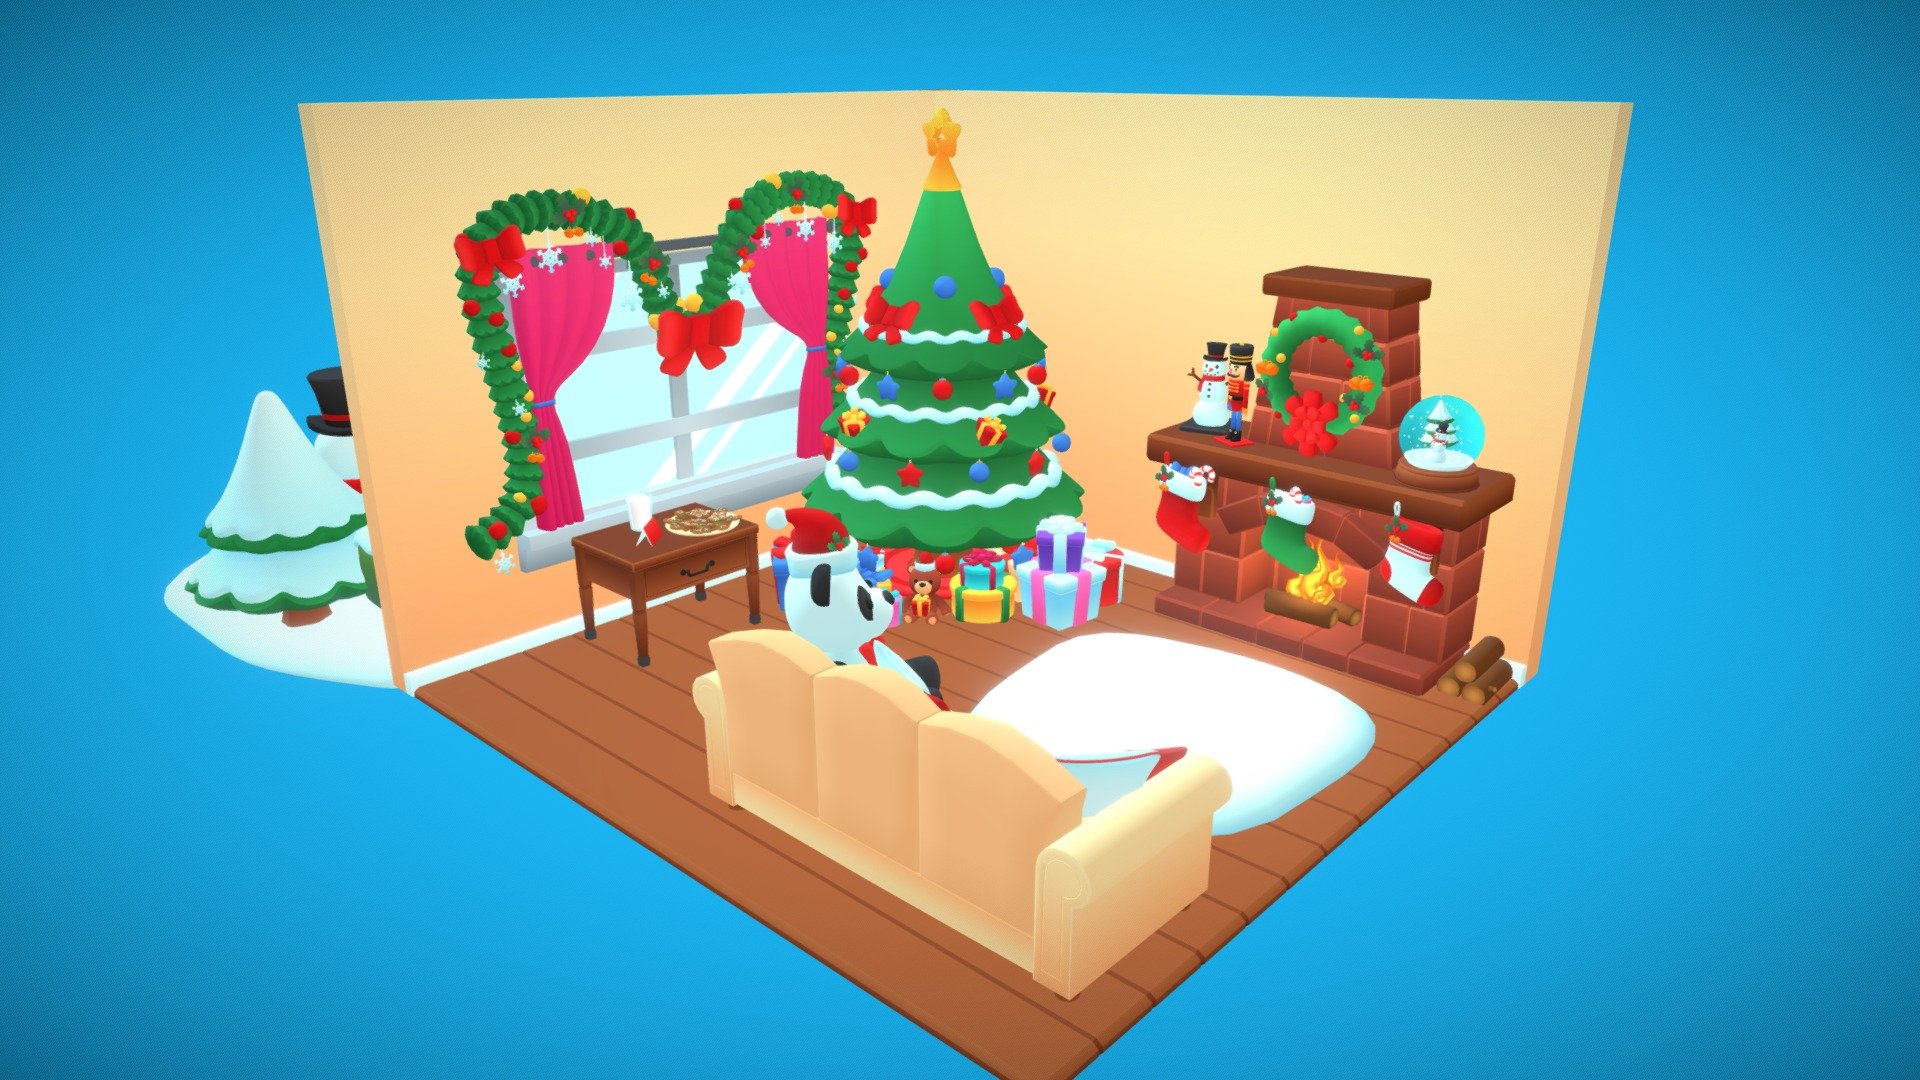 Decorations finished, now wait for Santa.

Assets used in this small scenario are available in the Store-------&gt;https://skfb.ly/6Xsyt - Christmas Toon Assets Scene - 3D model by Ergoni 3d model